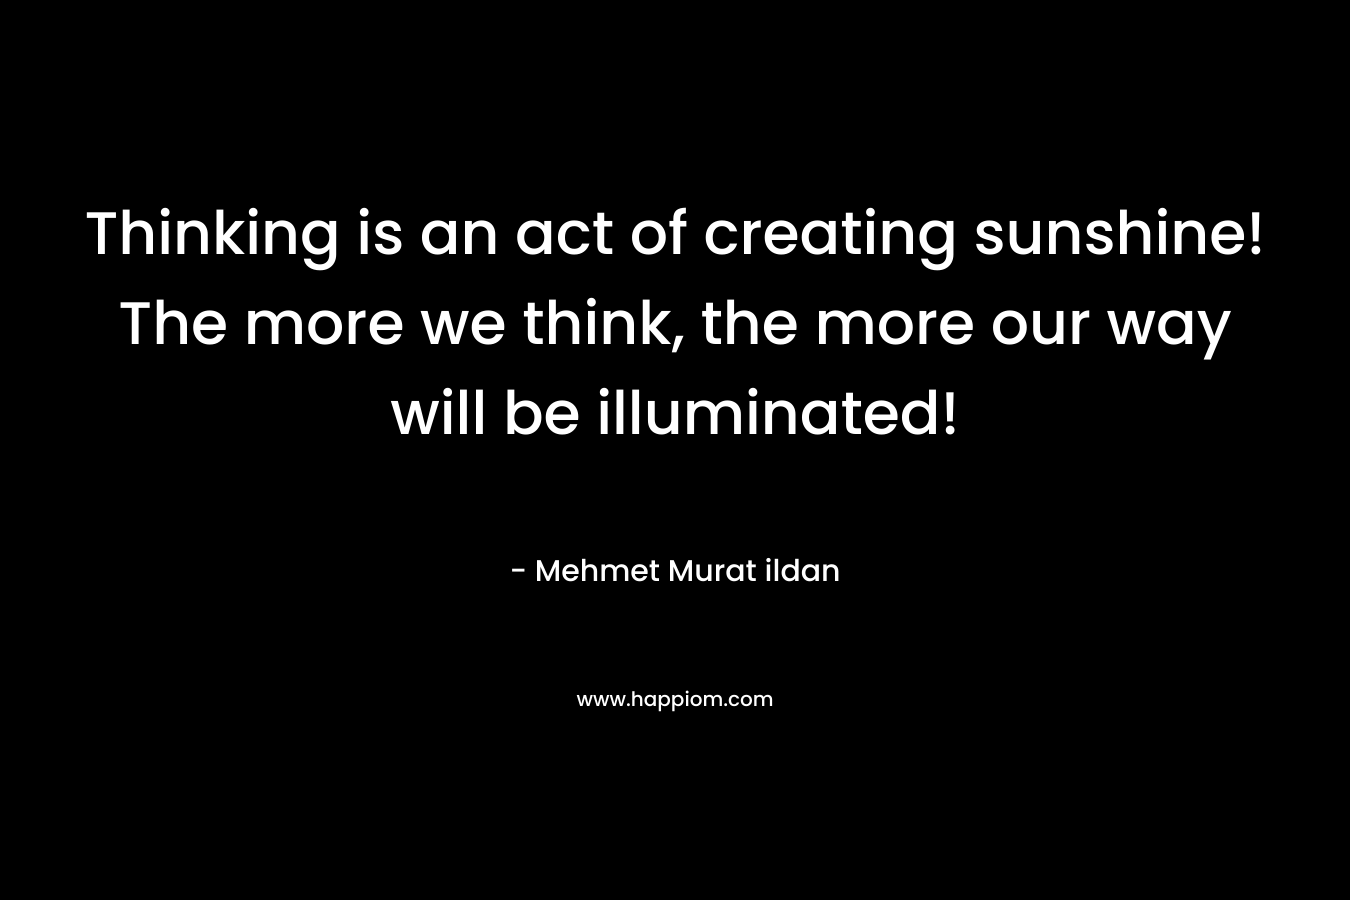 Thinking is an act of creating sunshine! The more we think, the more our way will be illuminated! – Mehmet Murat ildan